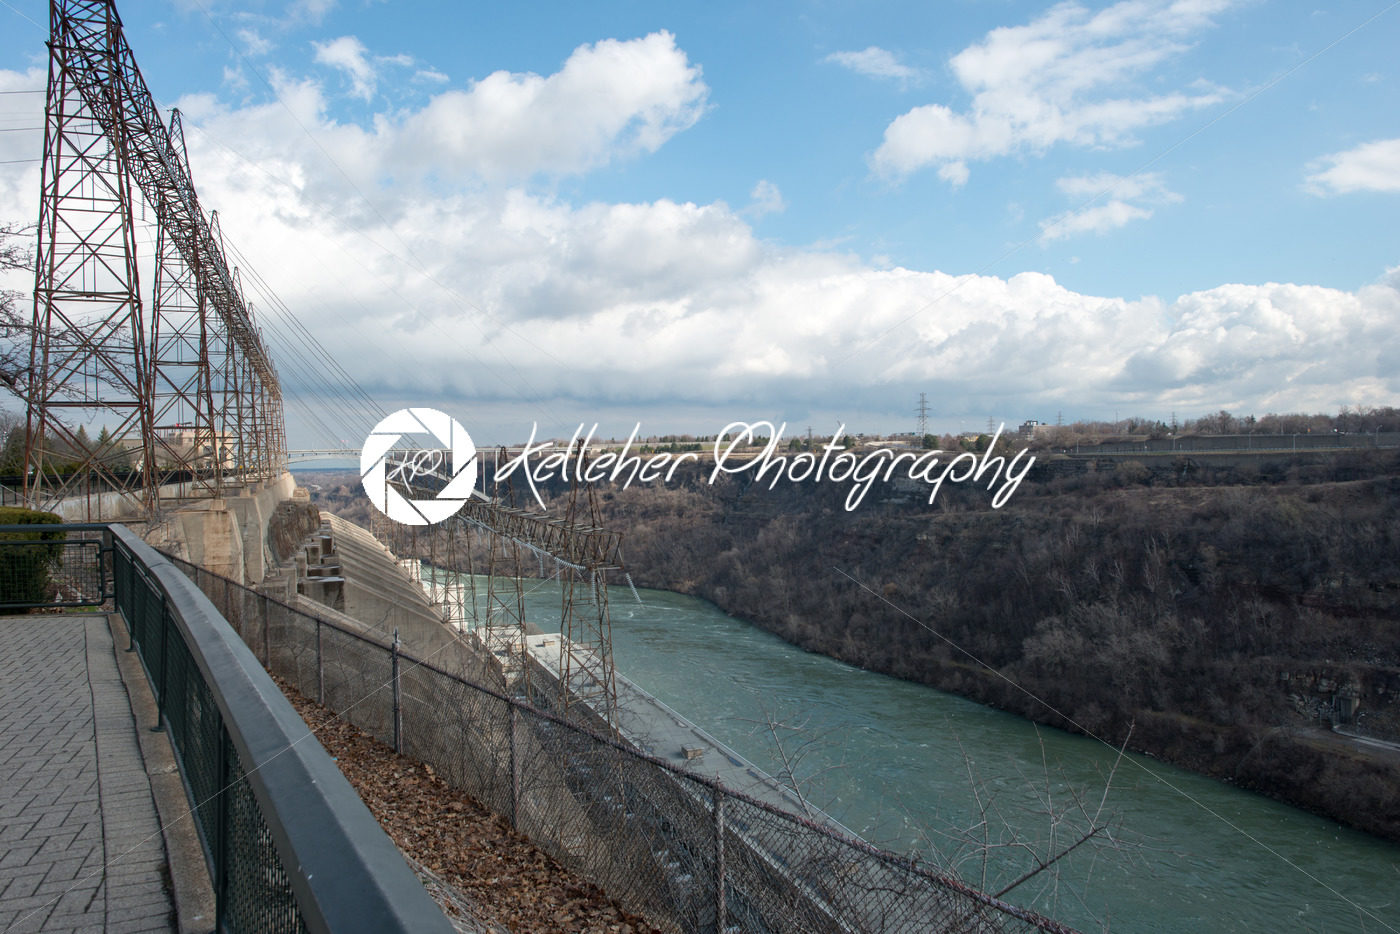 View of the Sir Adam Beck Hydroelectric Generating Stations seen from Ontario Canada. - Kelleher Photography Store